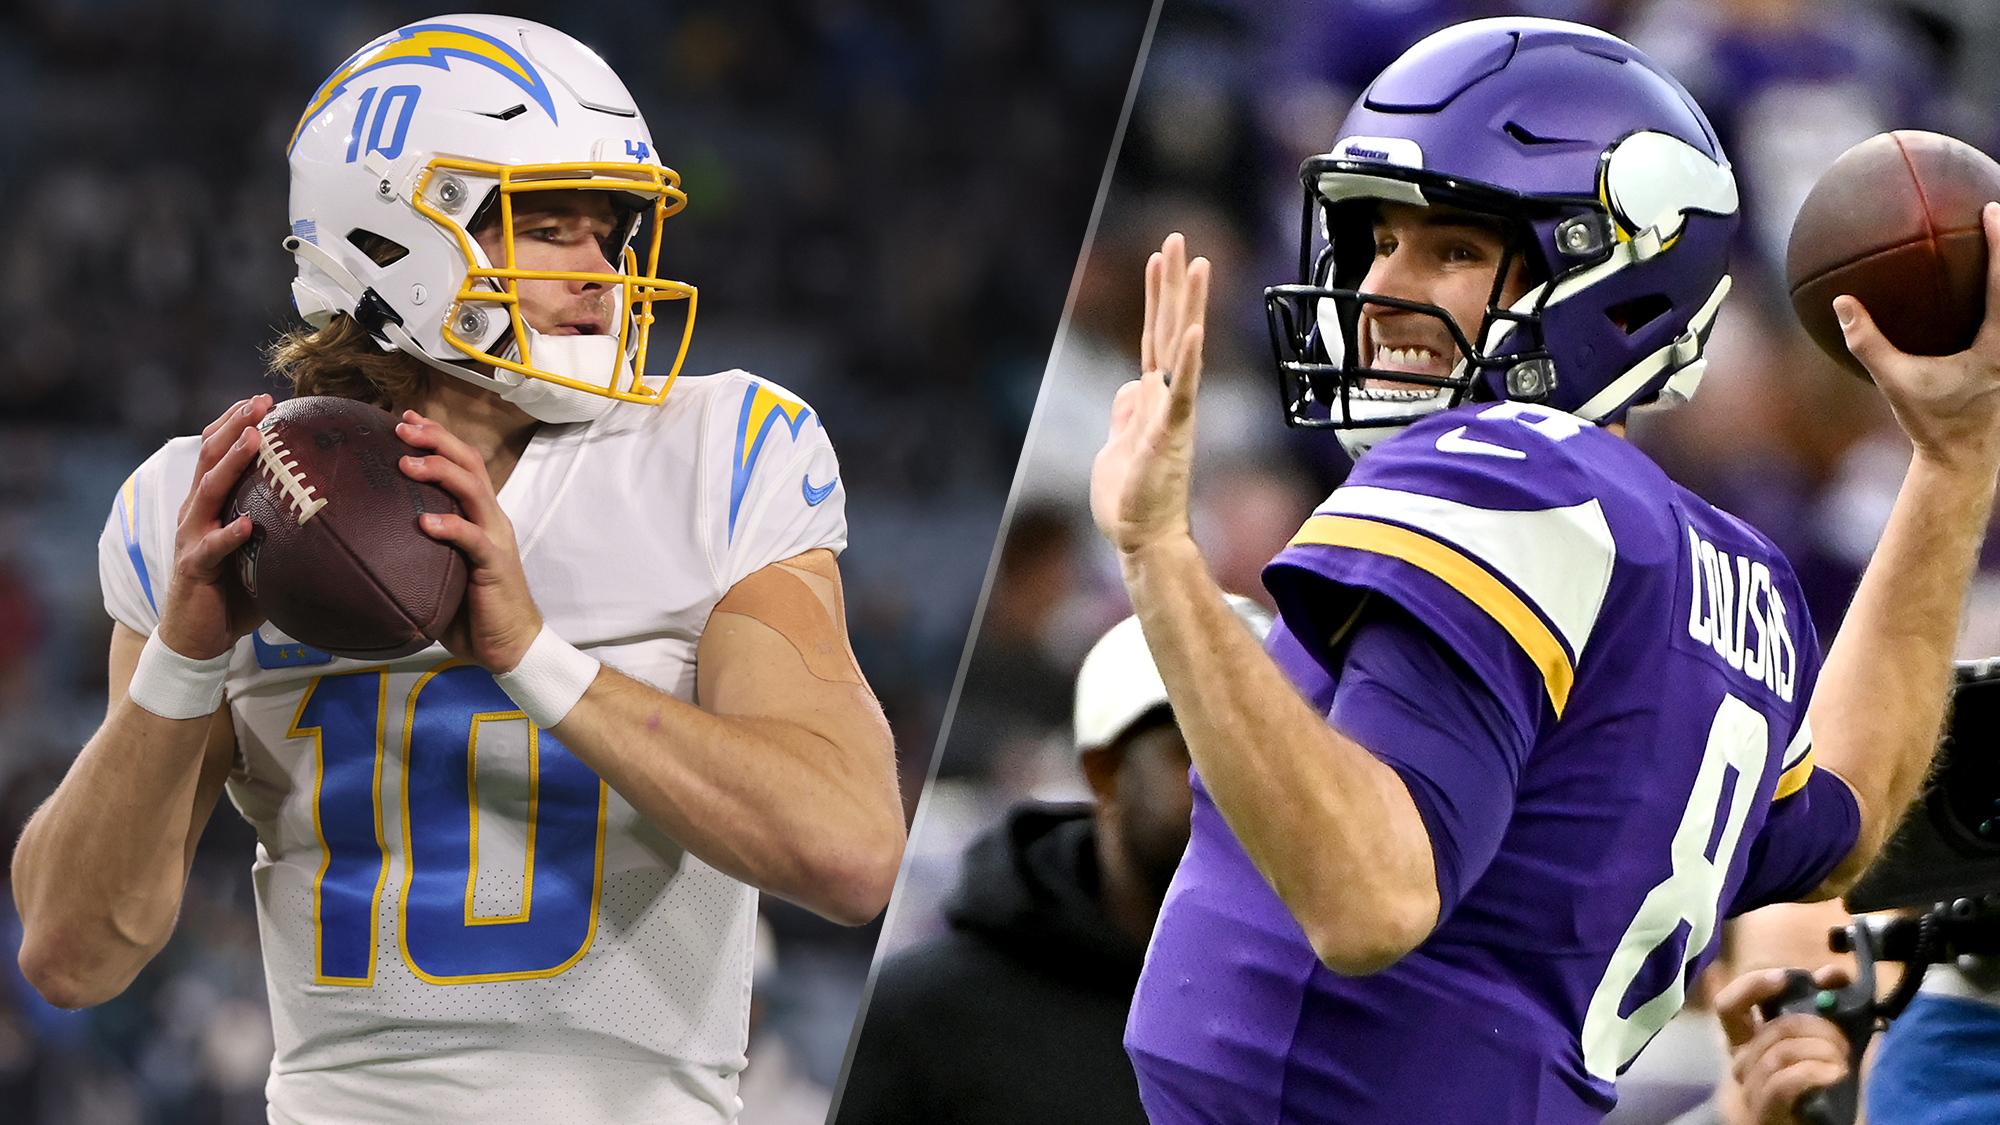 Chargers vs Vikings live stream: How to watch NFL week 3 game online